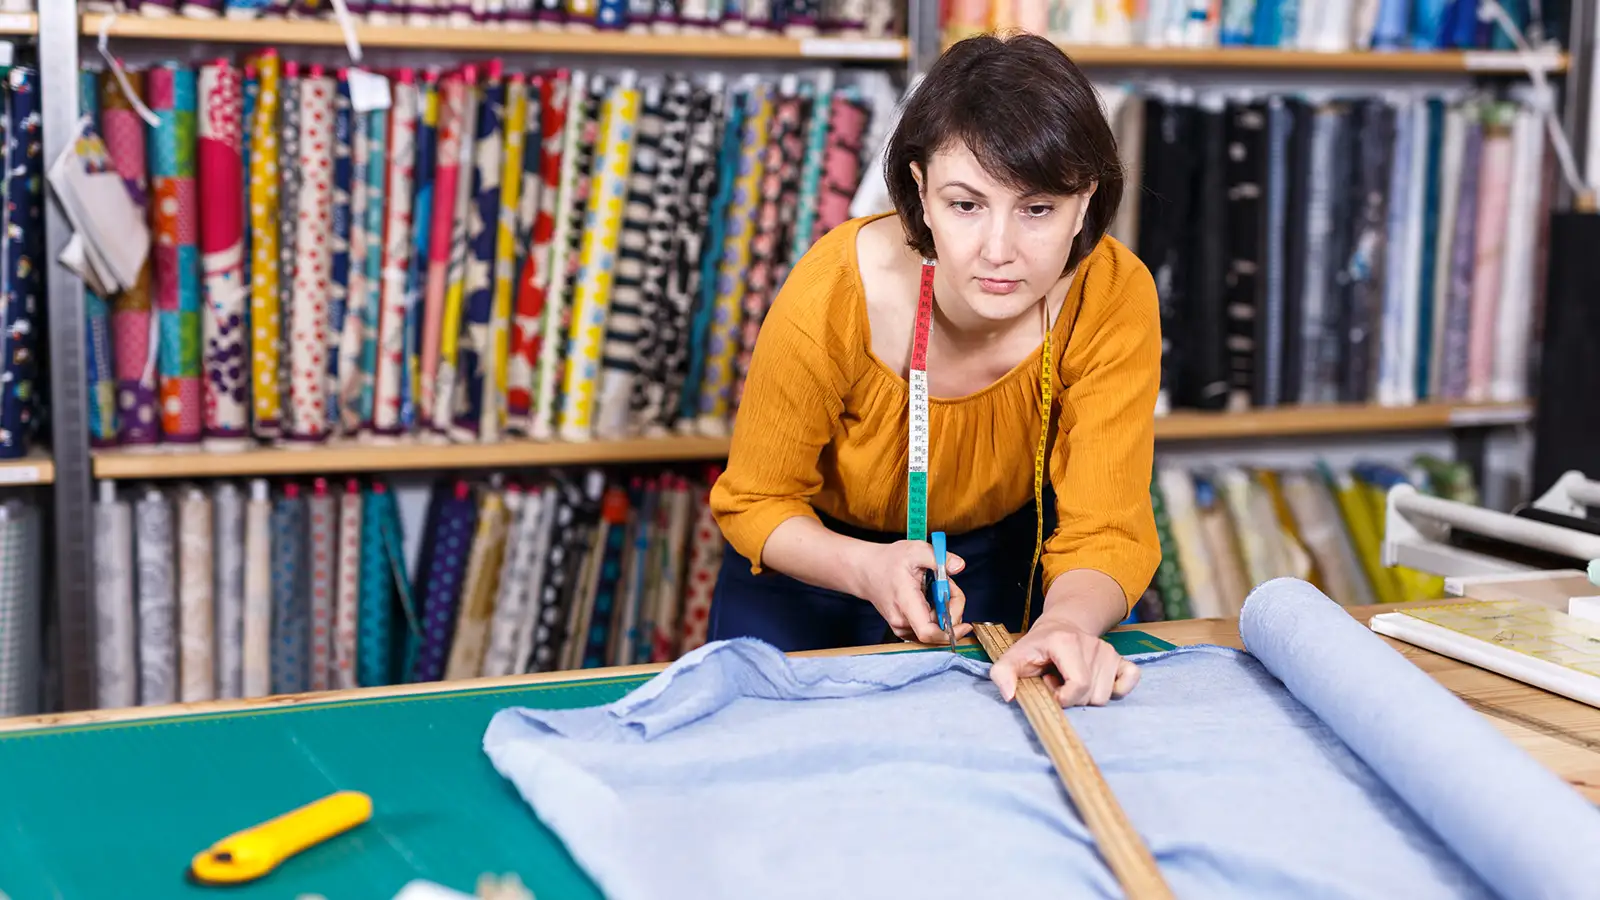 Practical Tips on How to Find the Grain of Fabric for Your Projects